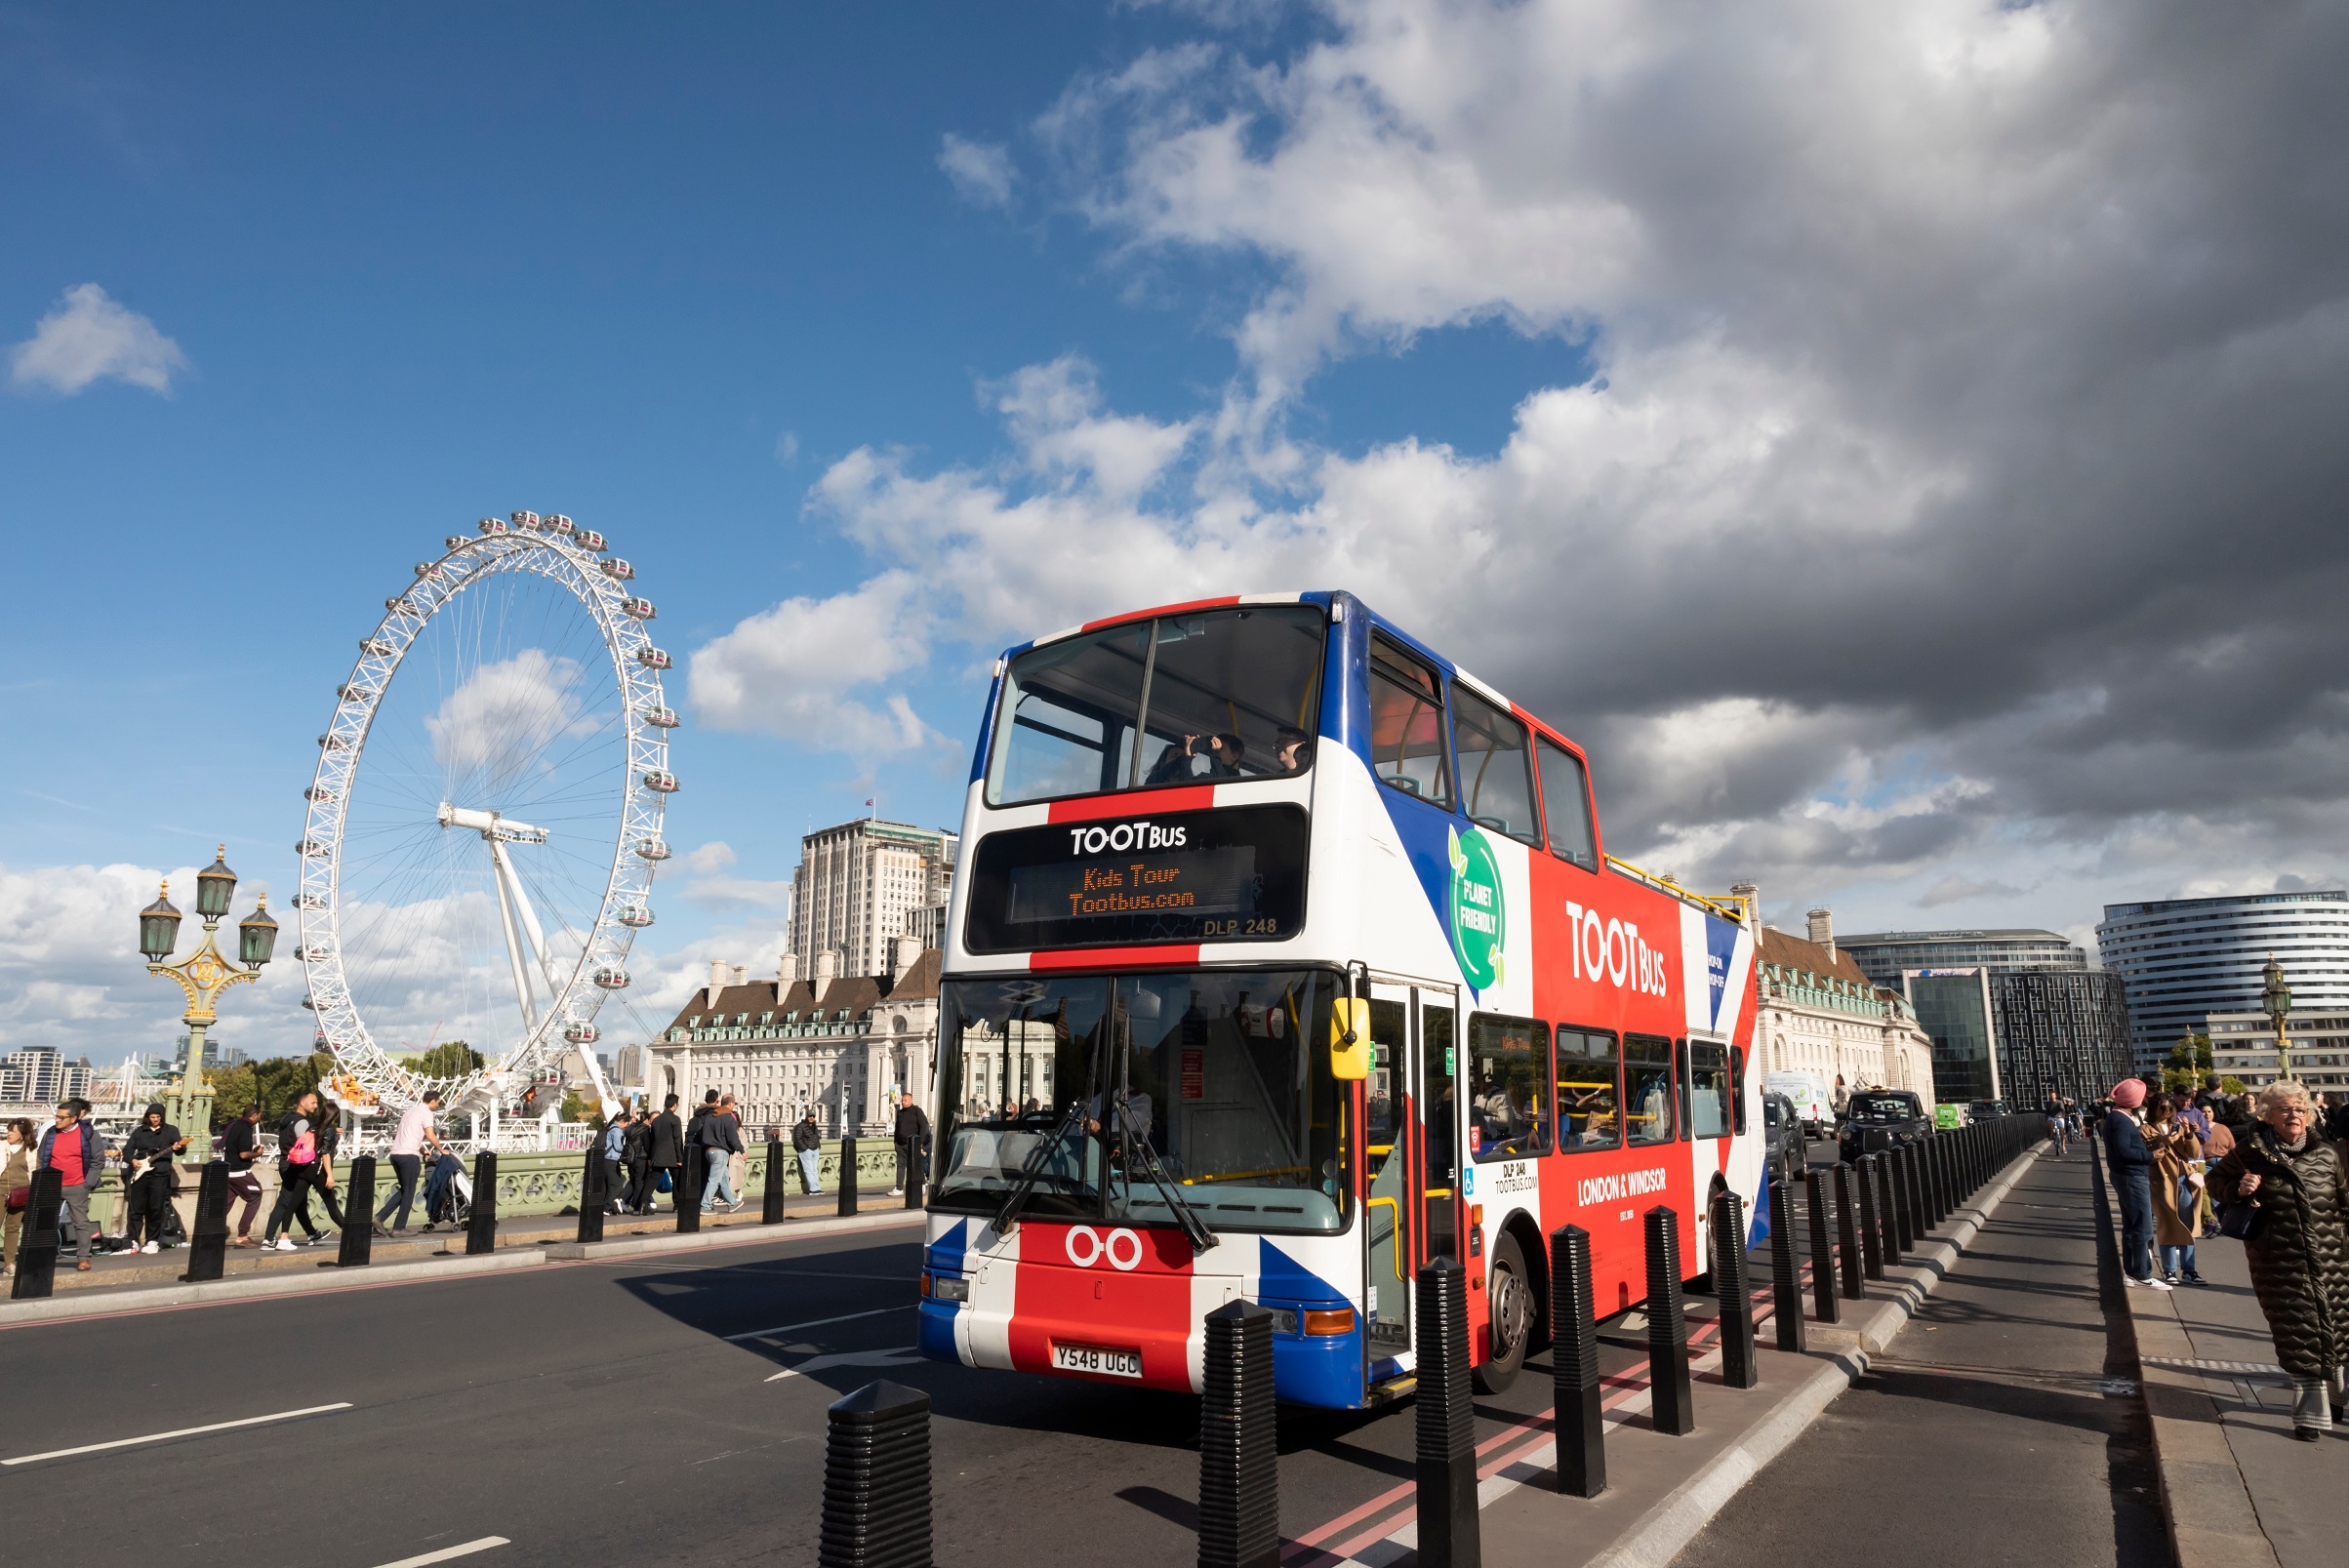 Tootbus London operates all its ICE vehicles on HVO